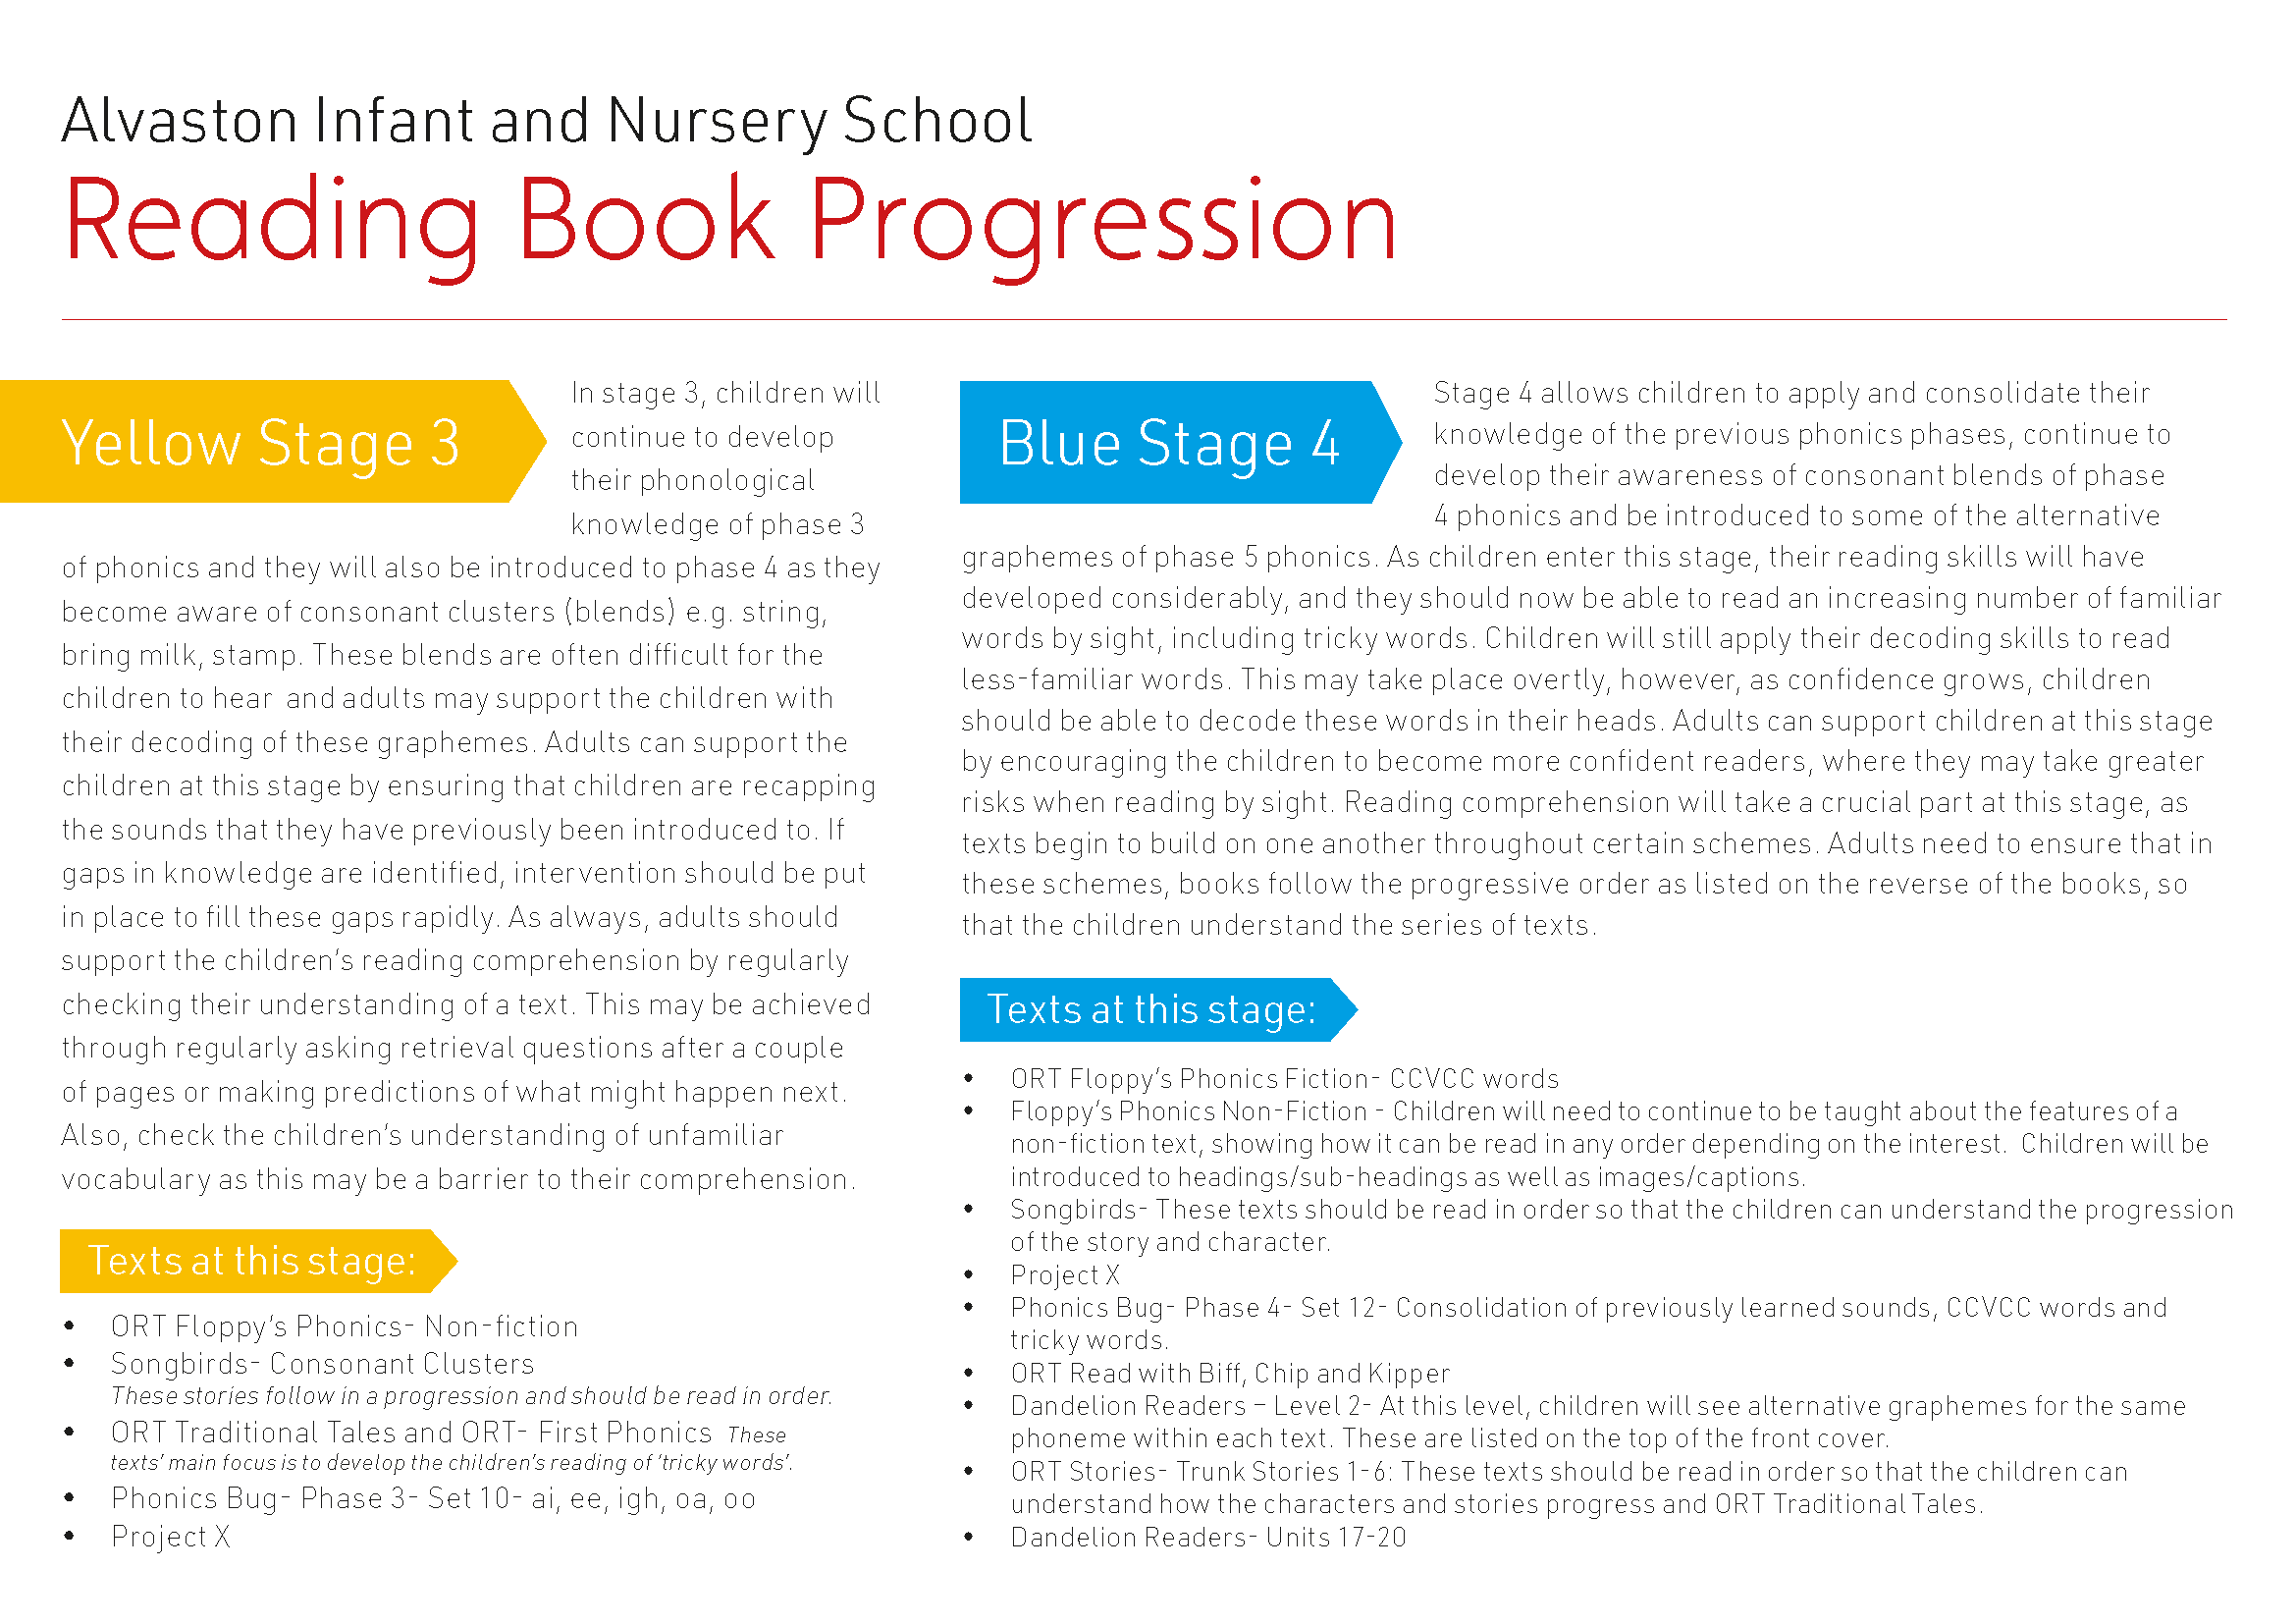 AIN Reading Book Progression_Page_4.png